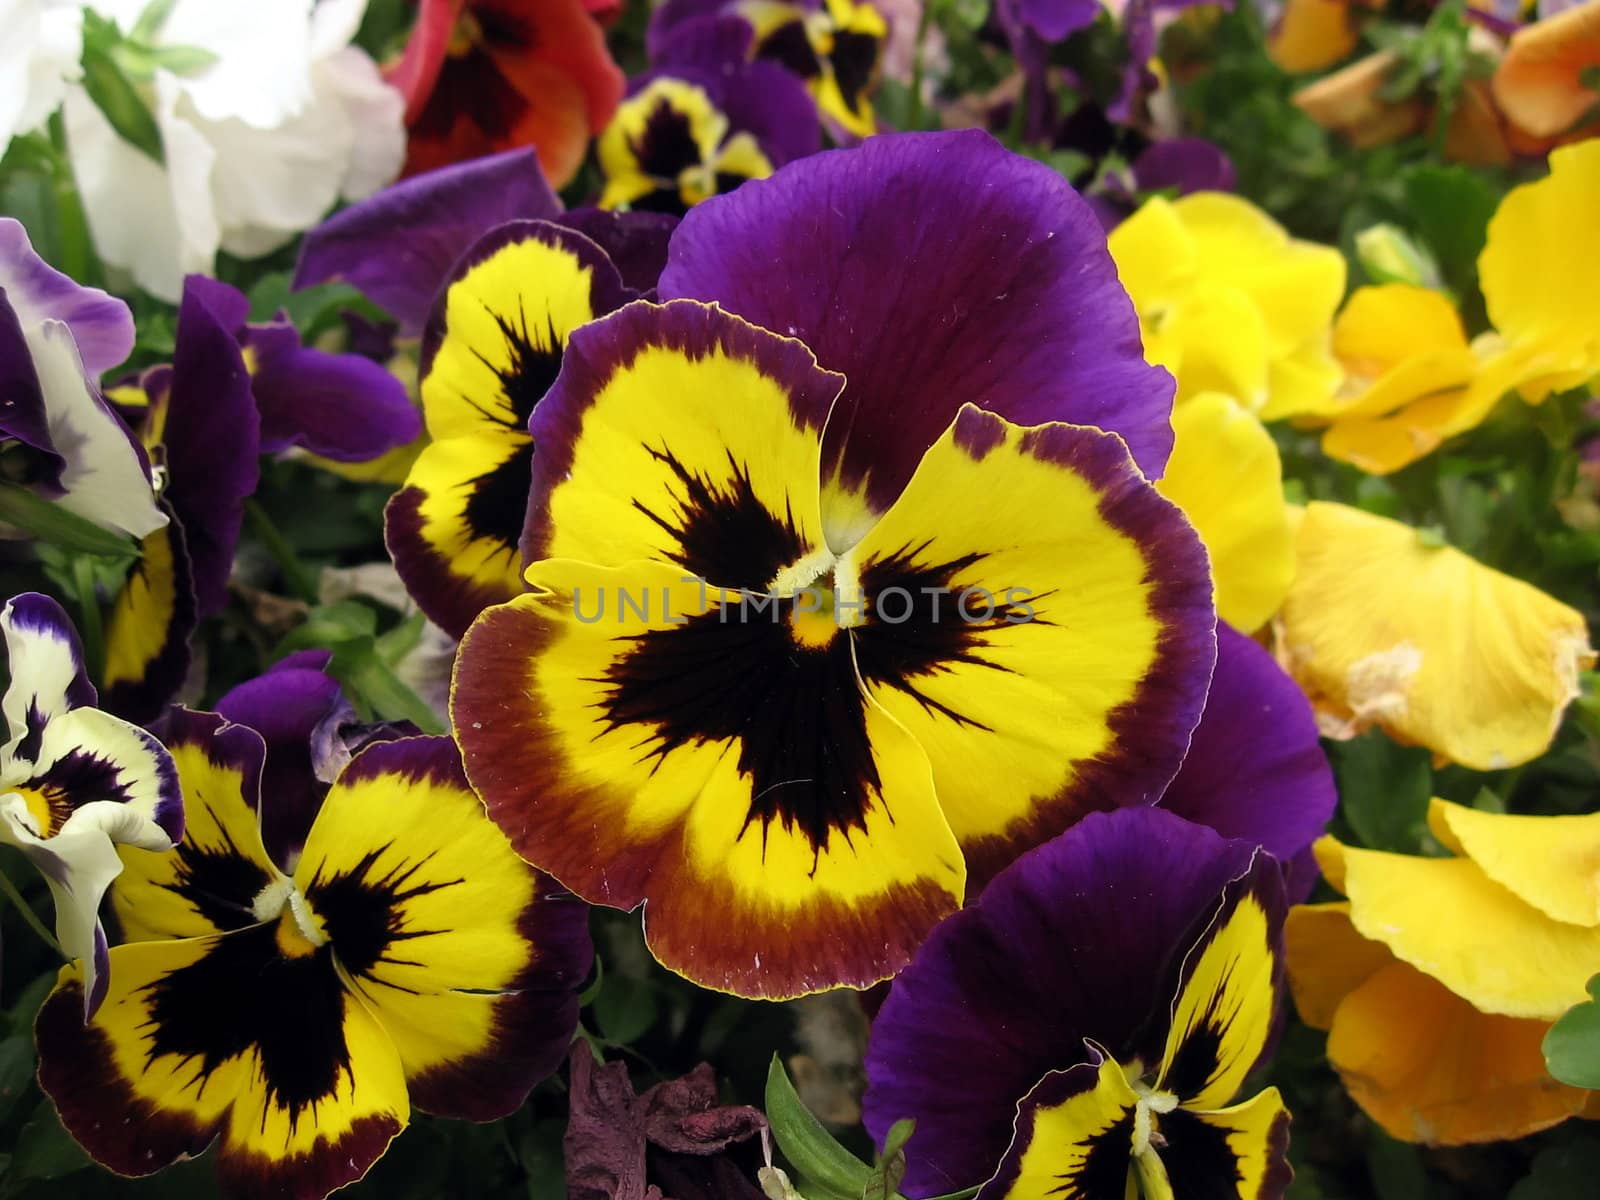 Colored pansies by tomatto